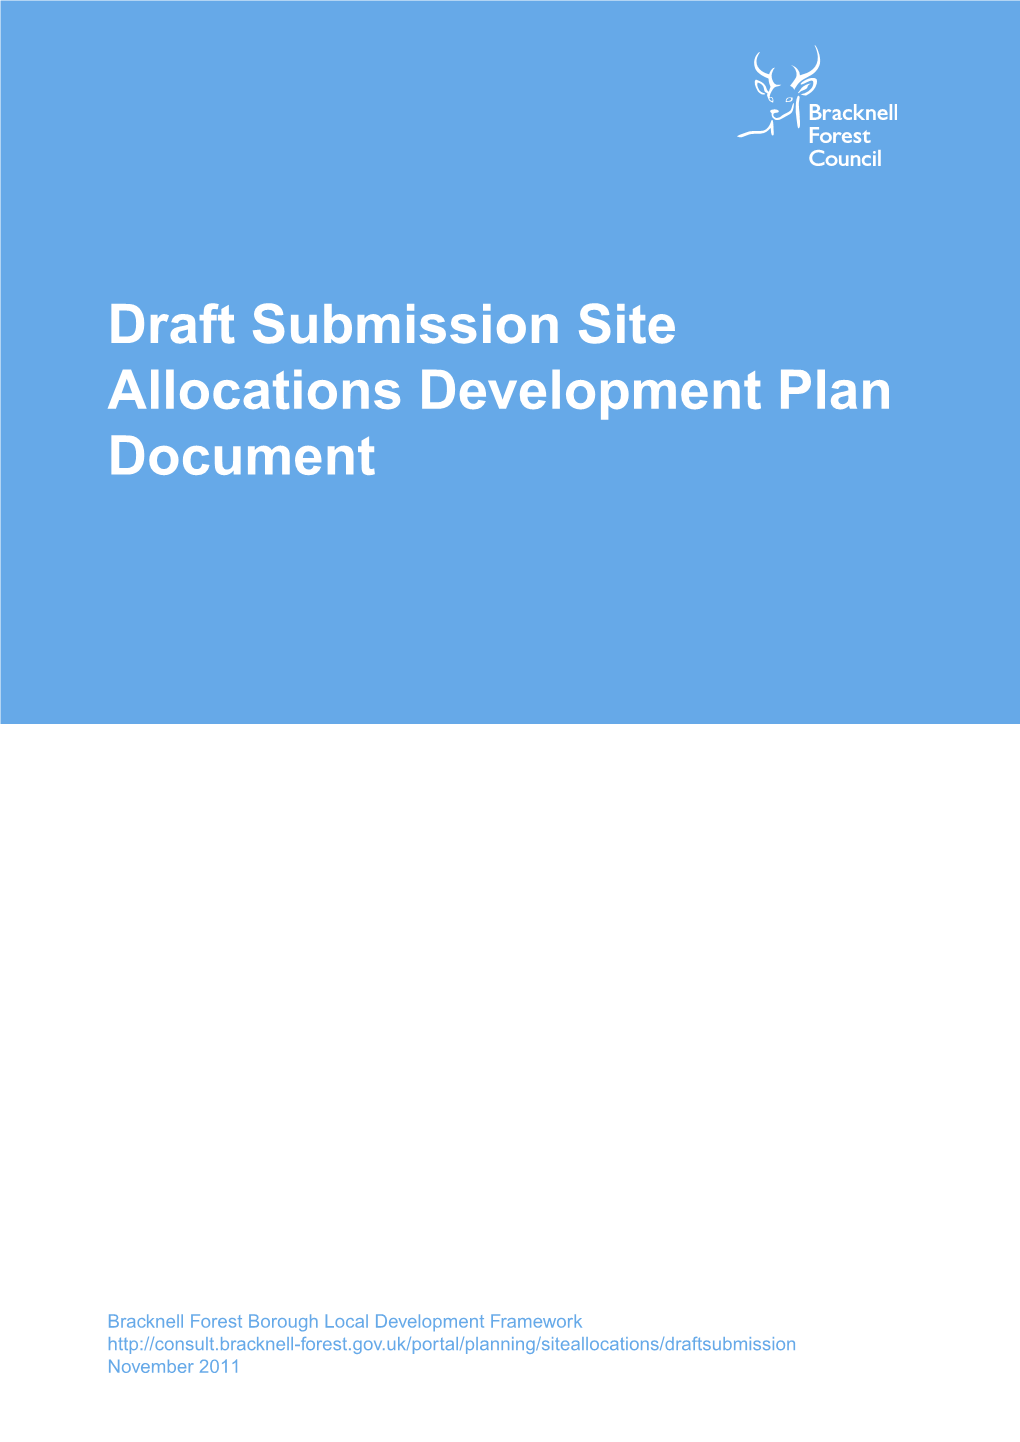 Draft Submission Site Allocations Development Plan Document